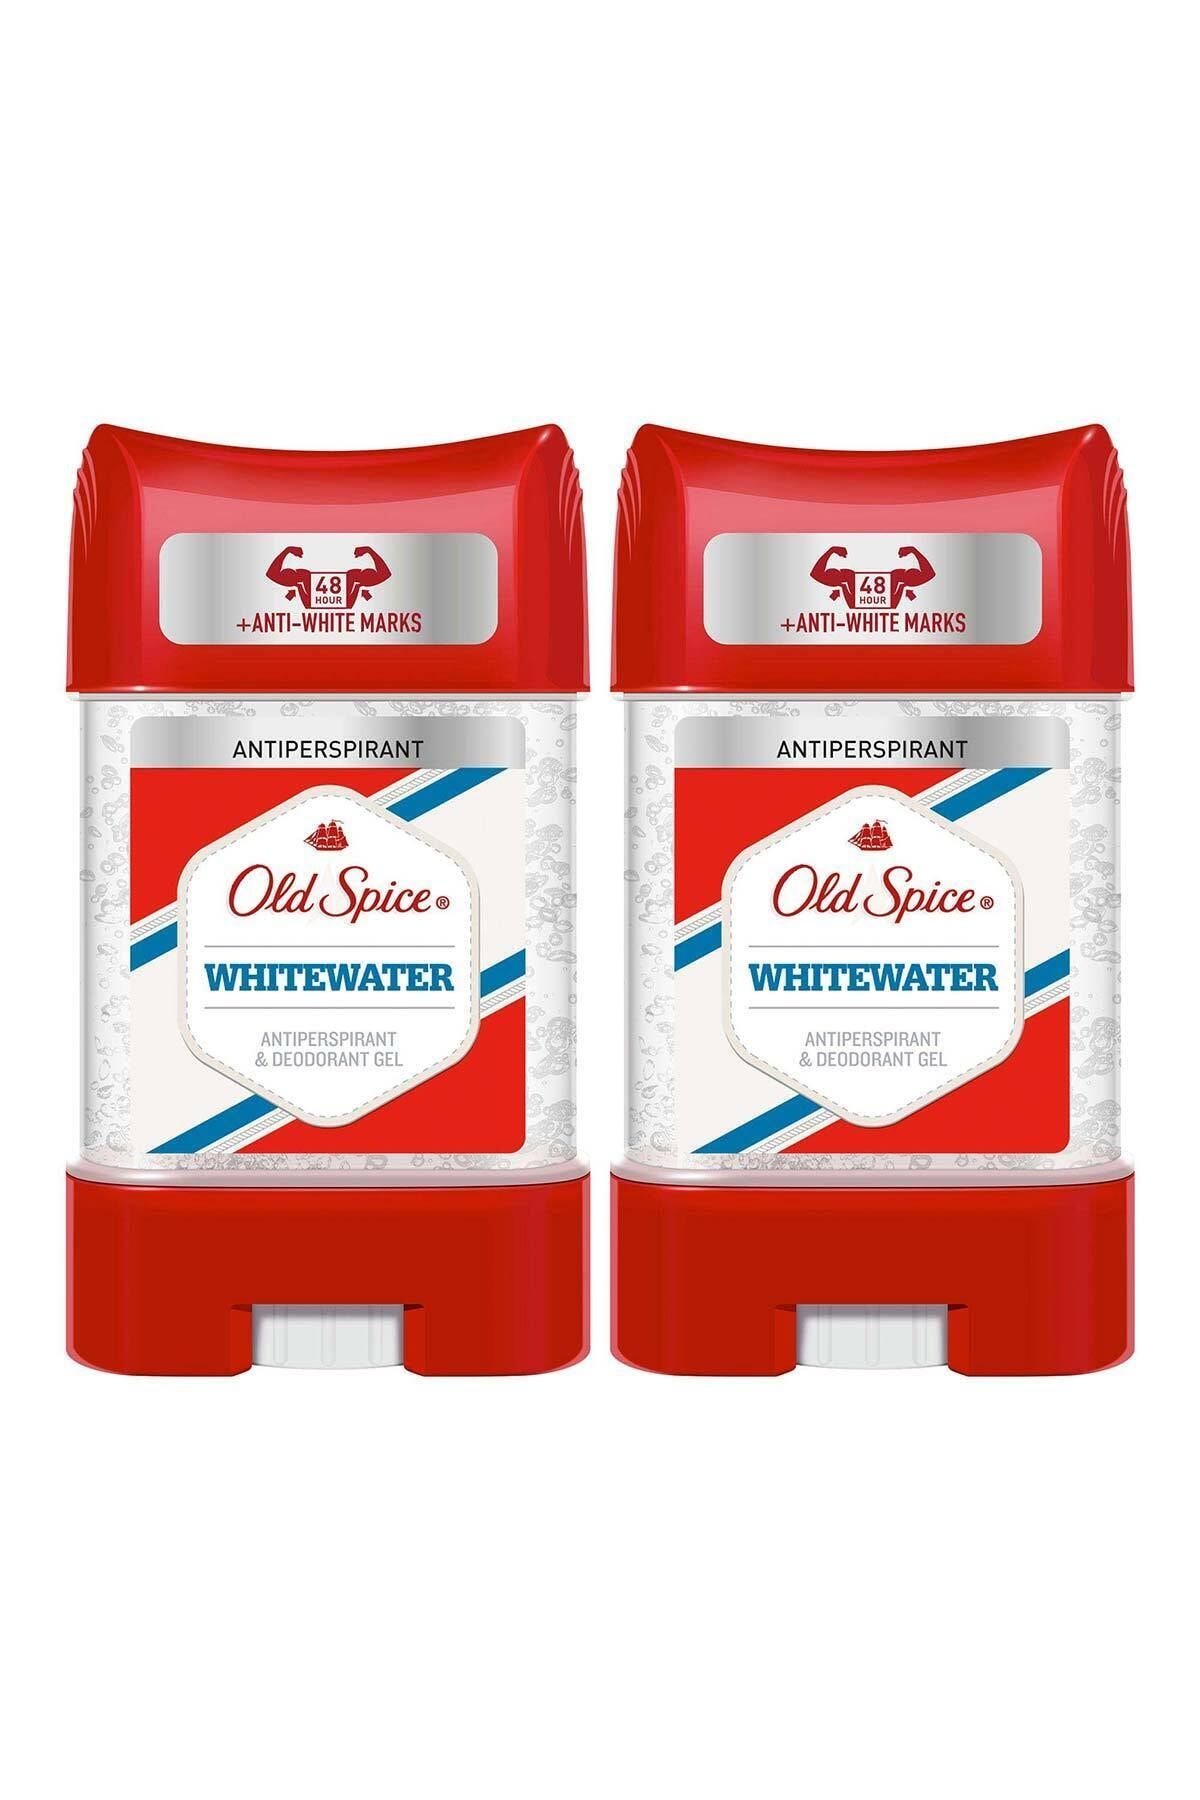 Old Spice Clear Jel 70 ml Whitewaterx2